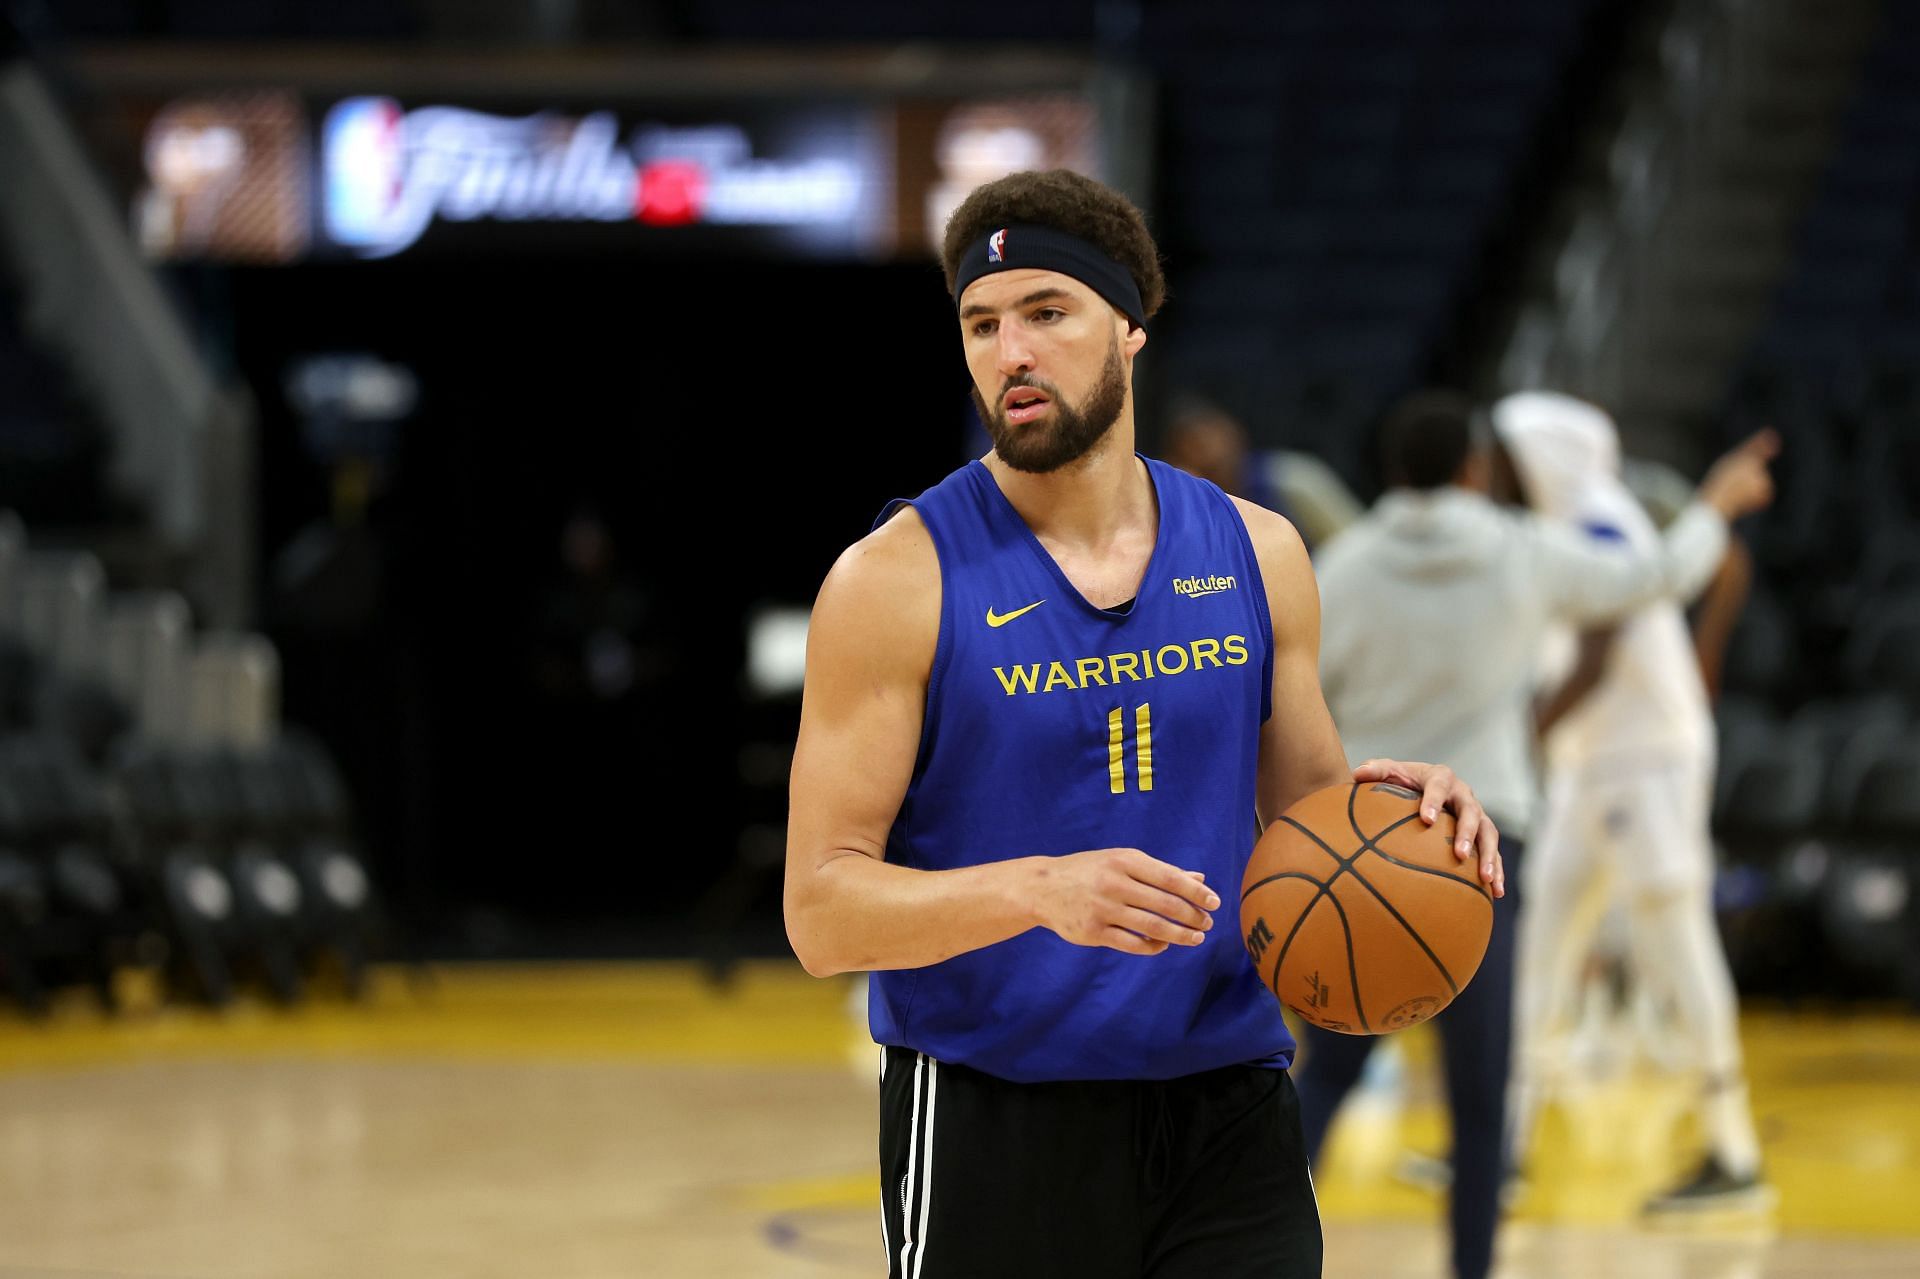 Klay Thompson of the Golden State Warriors at the 2022 NBA Finals - Media Day